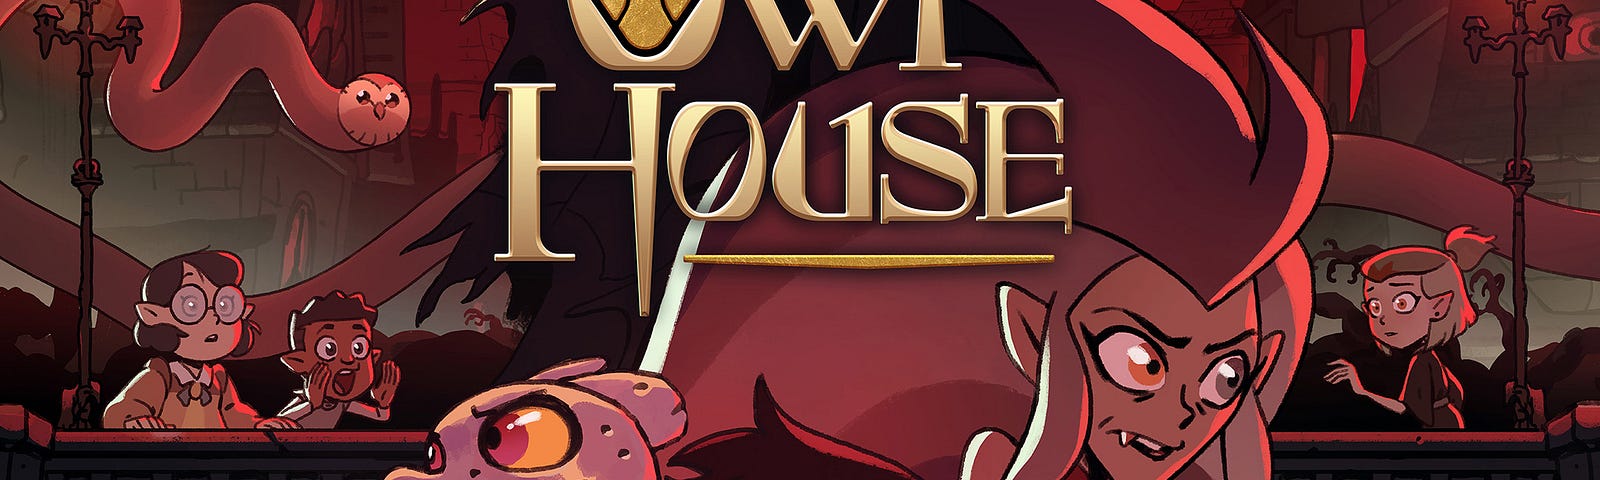 The Owl House Season Two Review - The Game of Nerds